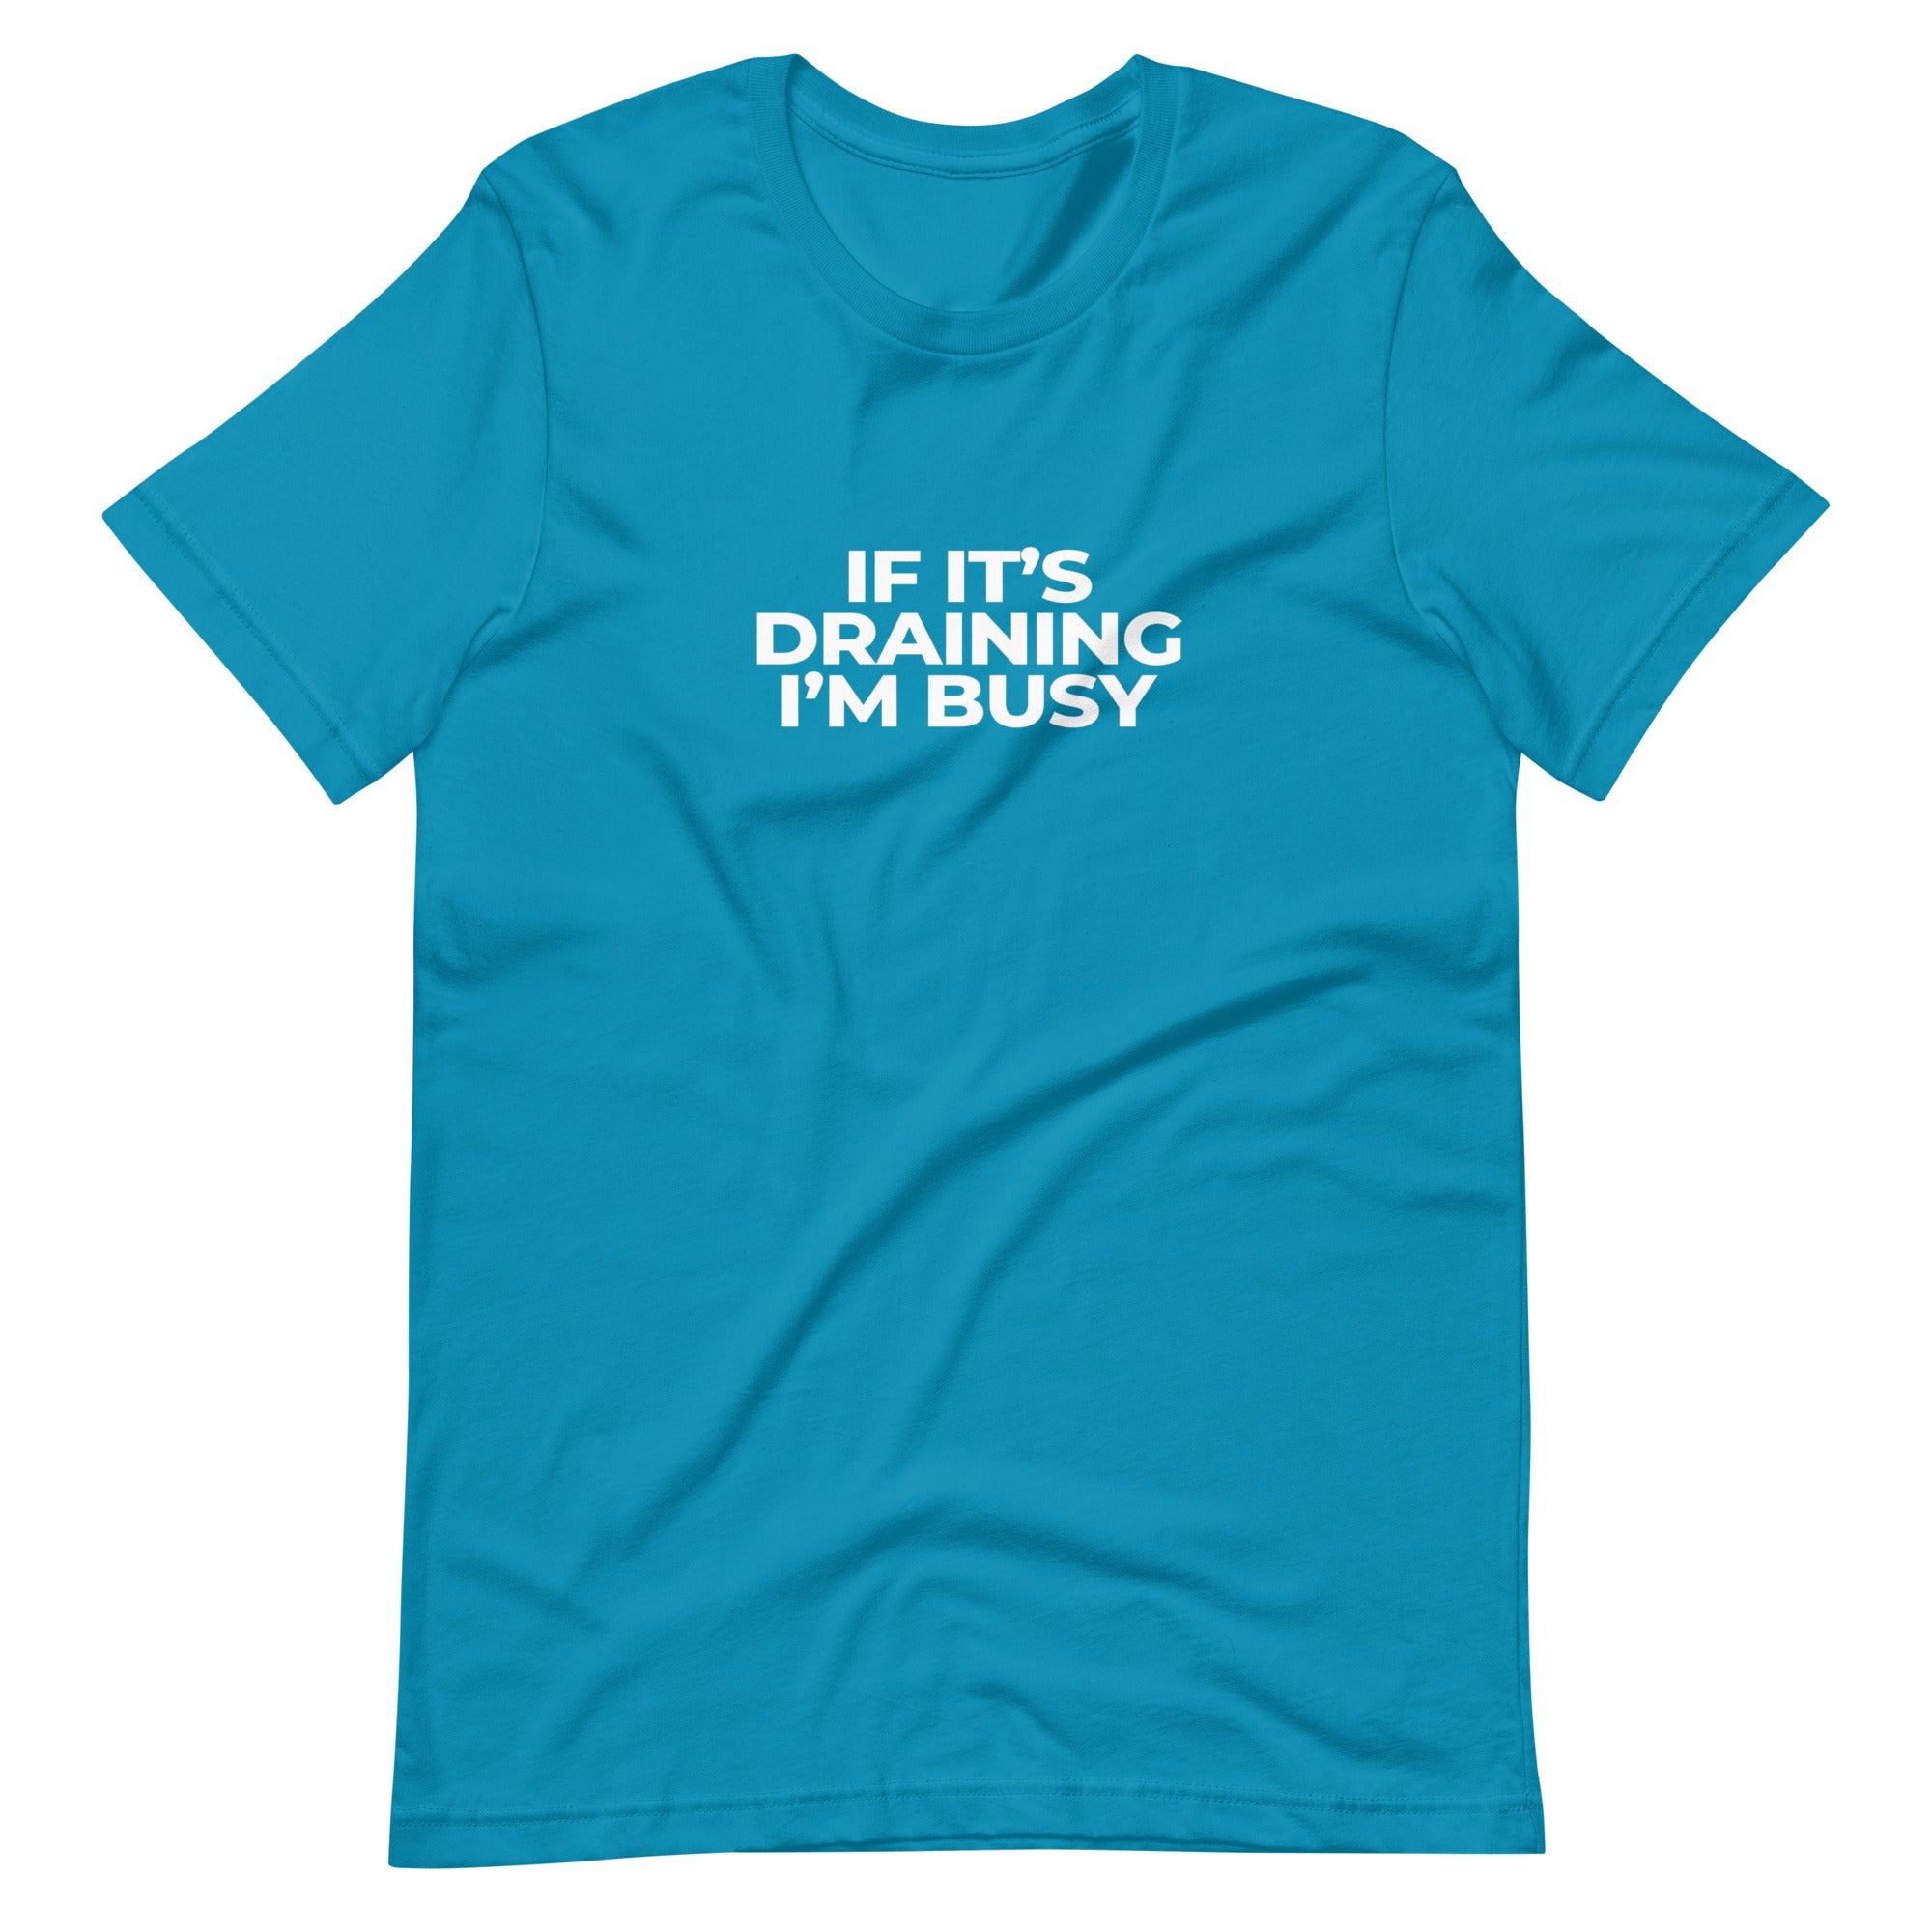 Adult Unisex "If It's Draining, I'm Busy" T-Shirt